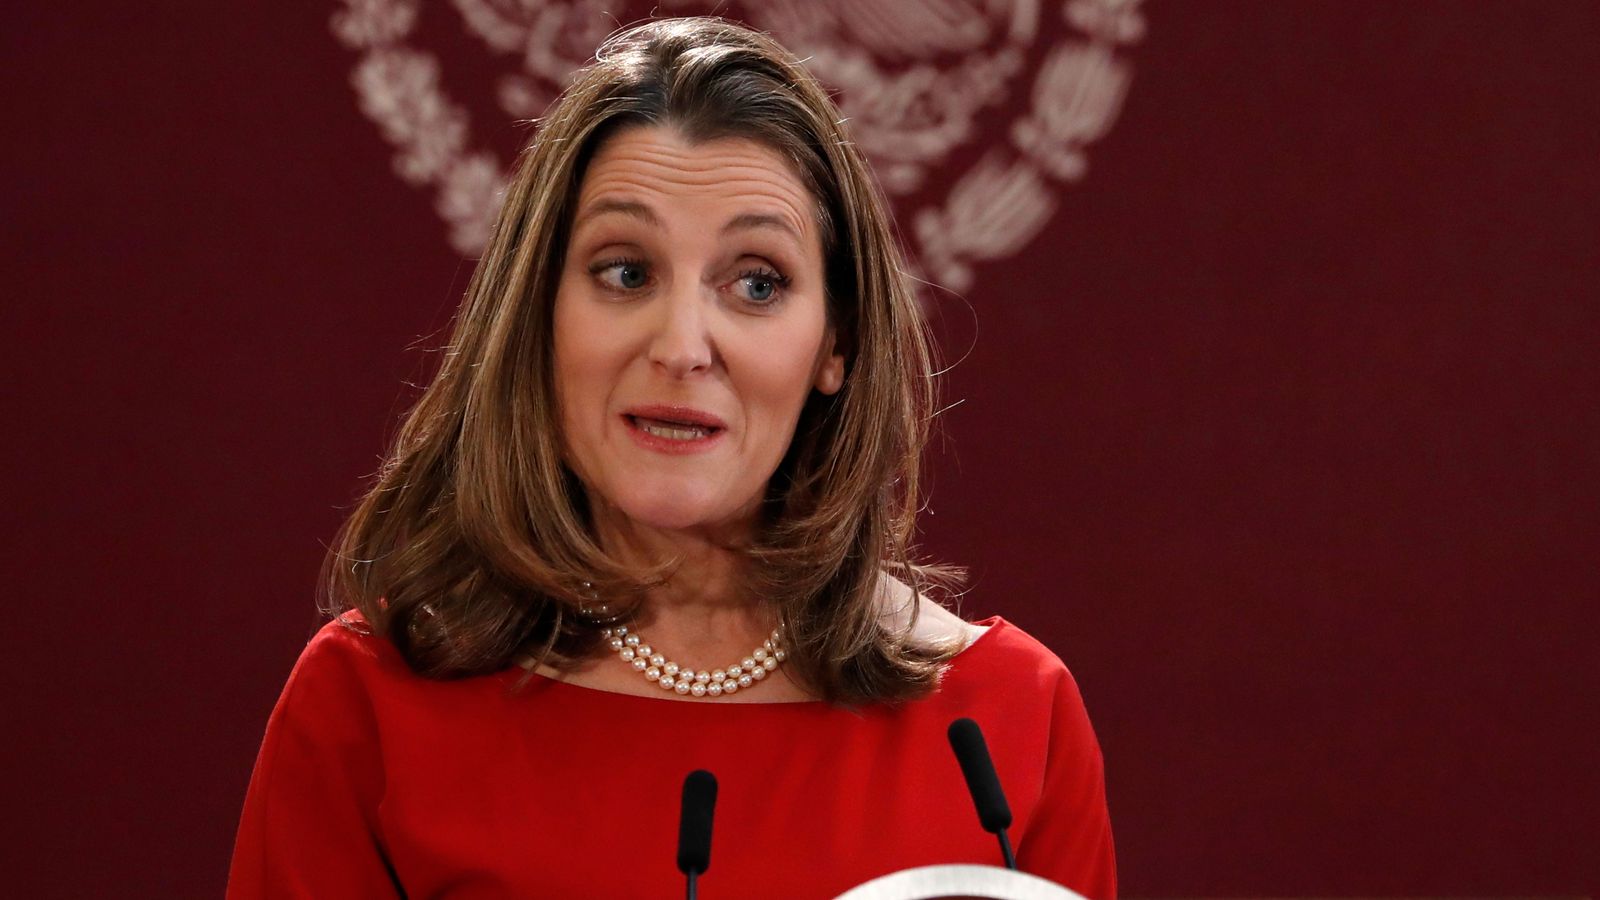 Who is Chrystia Freeland, Washington’s “first candidate” for NATO Secretary General?